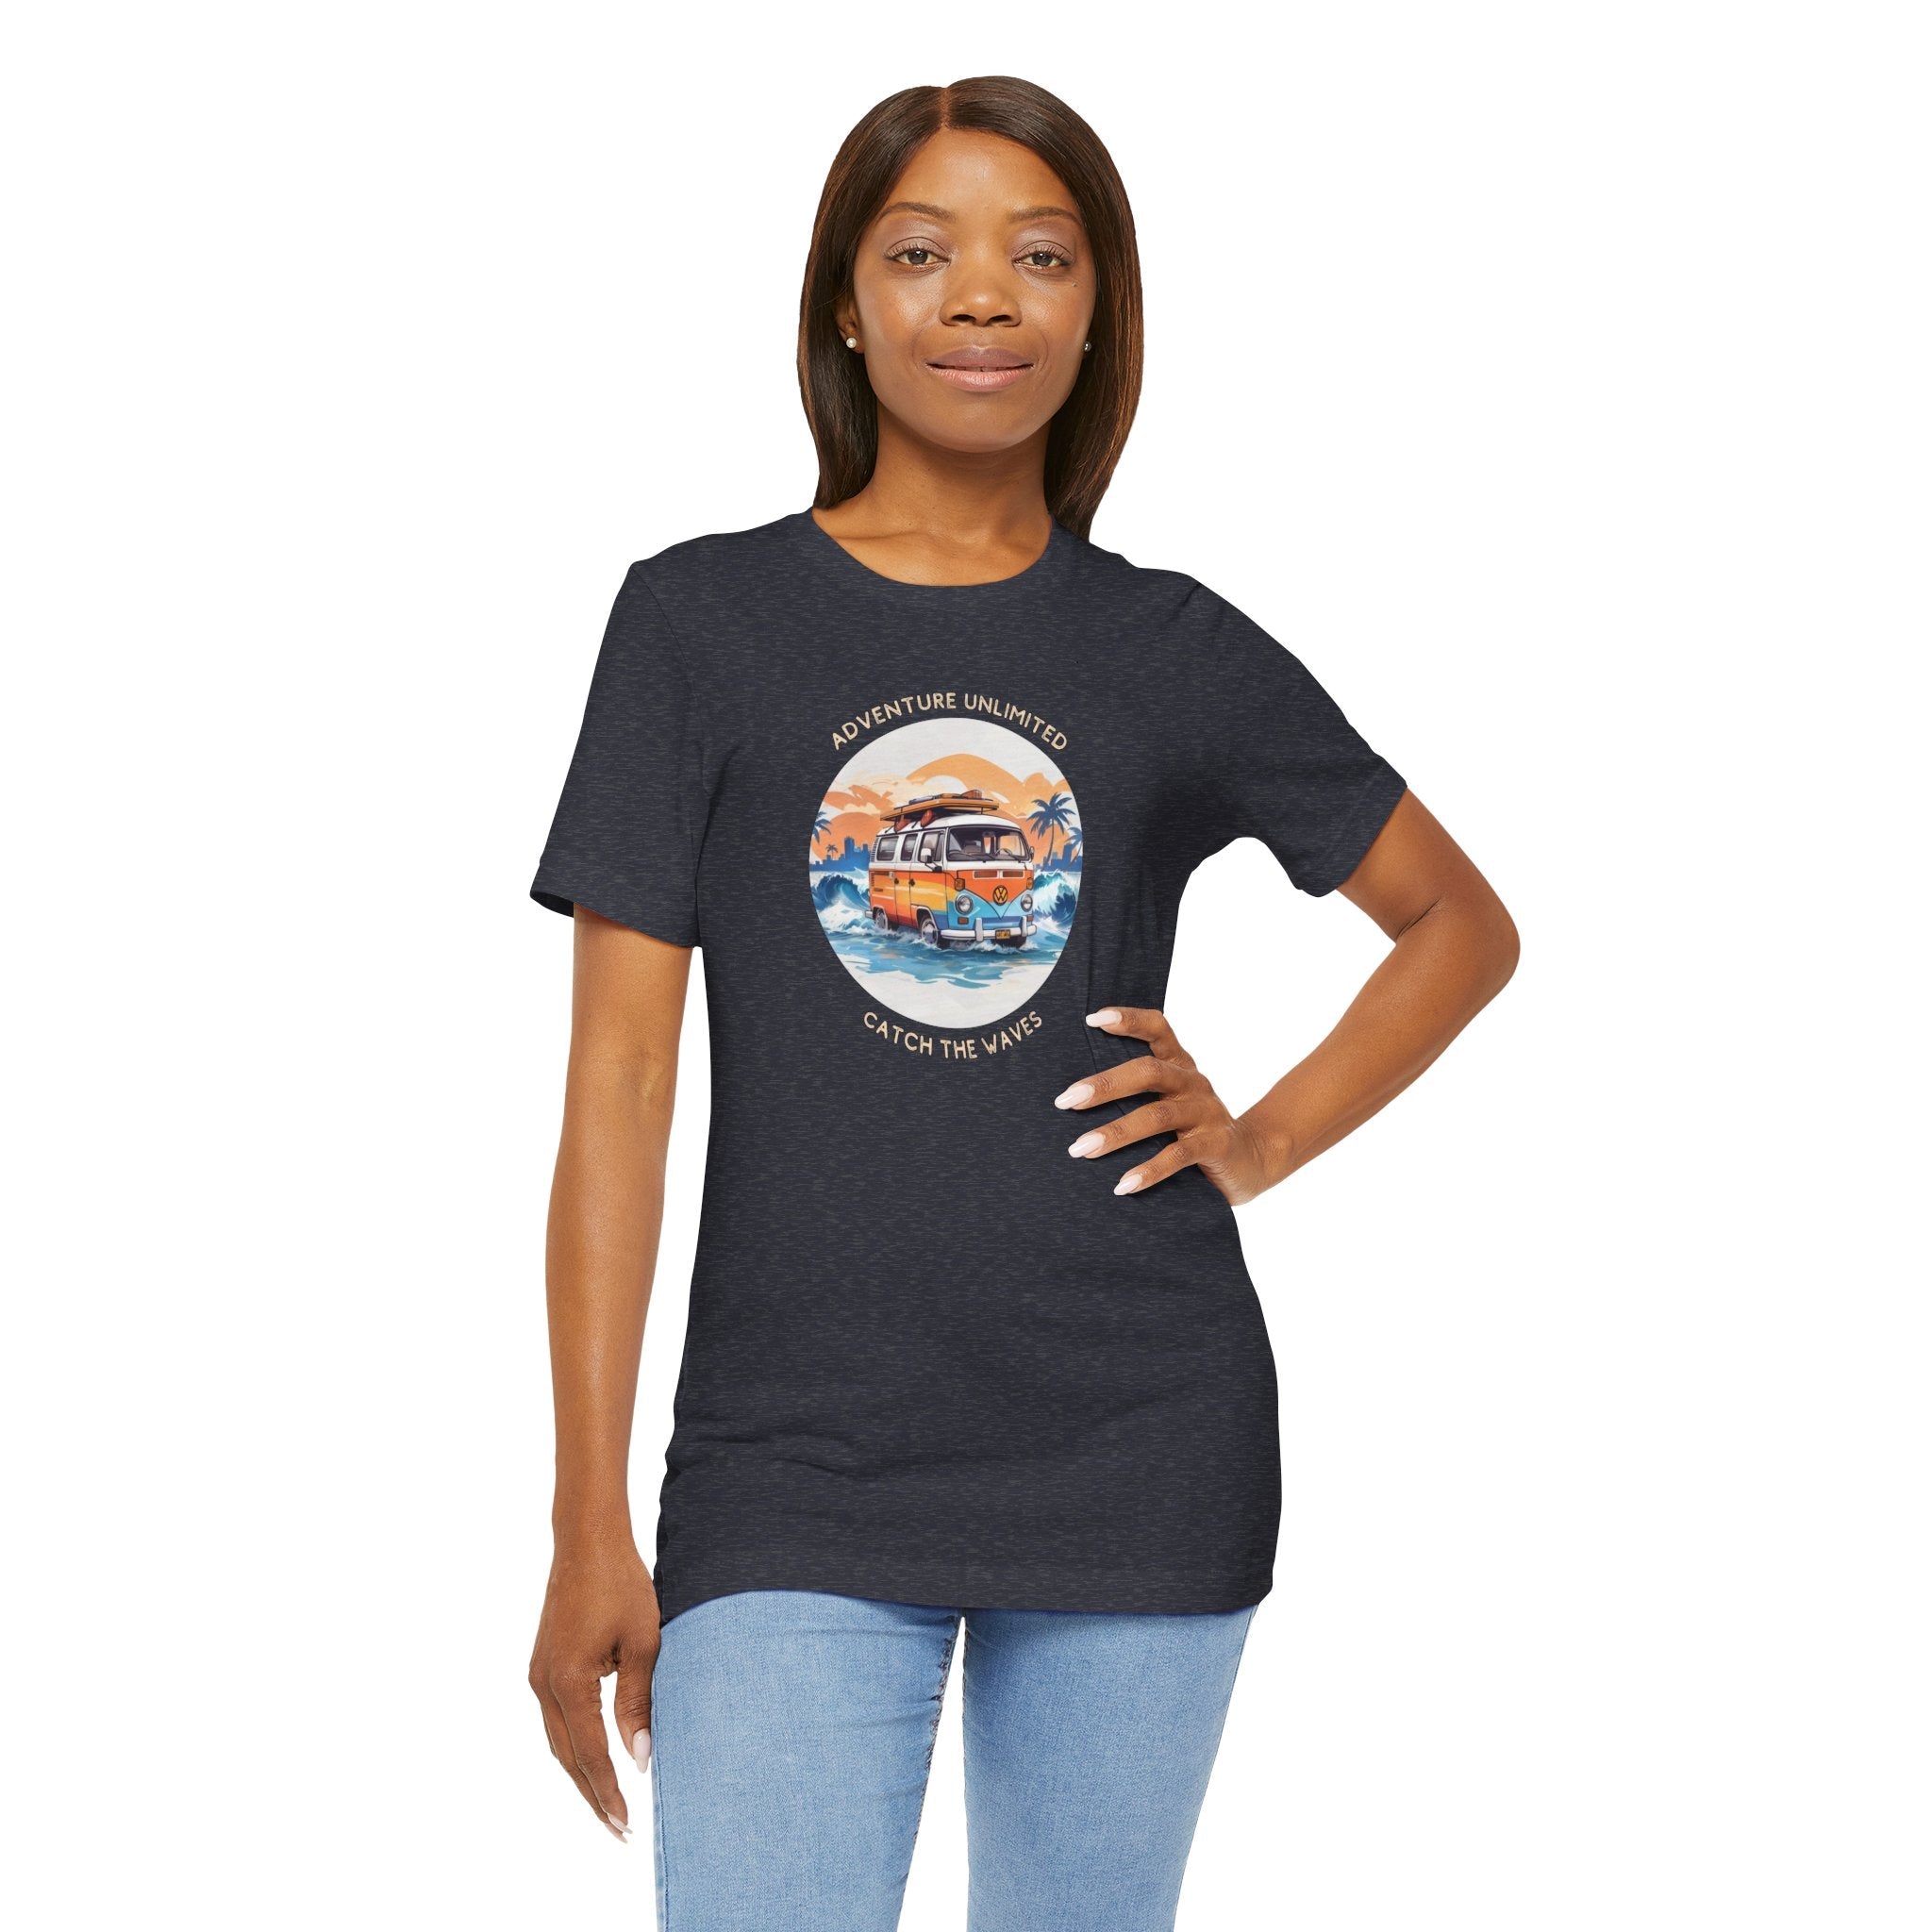 Adventure Unlimited printed navy t-shirt with ’the best day is a good day’ slogan, direct-to-garment item